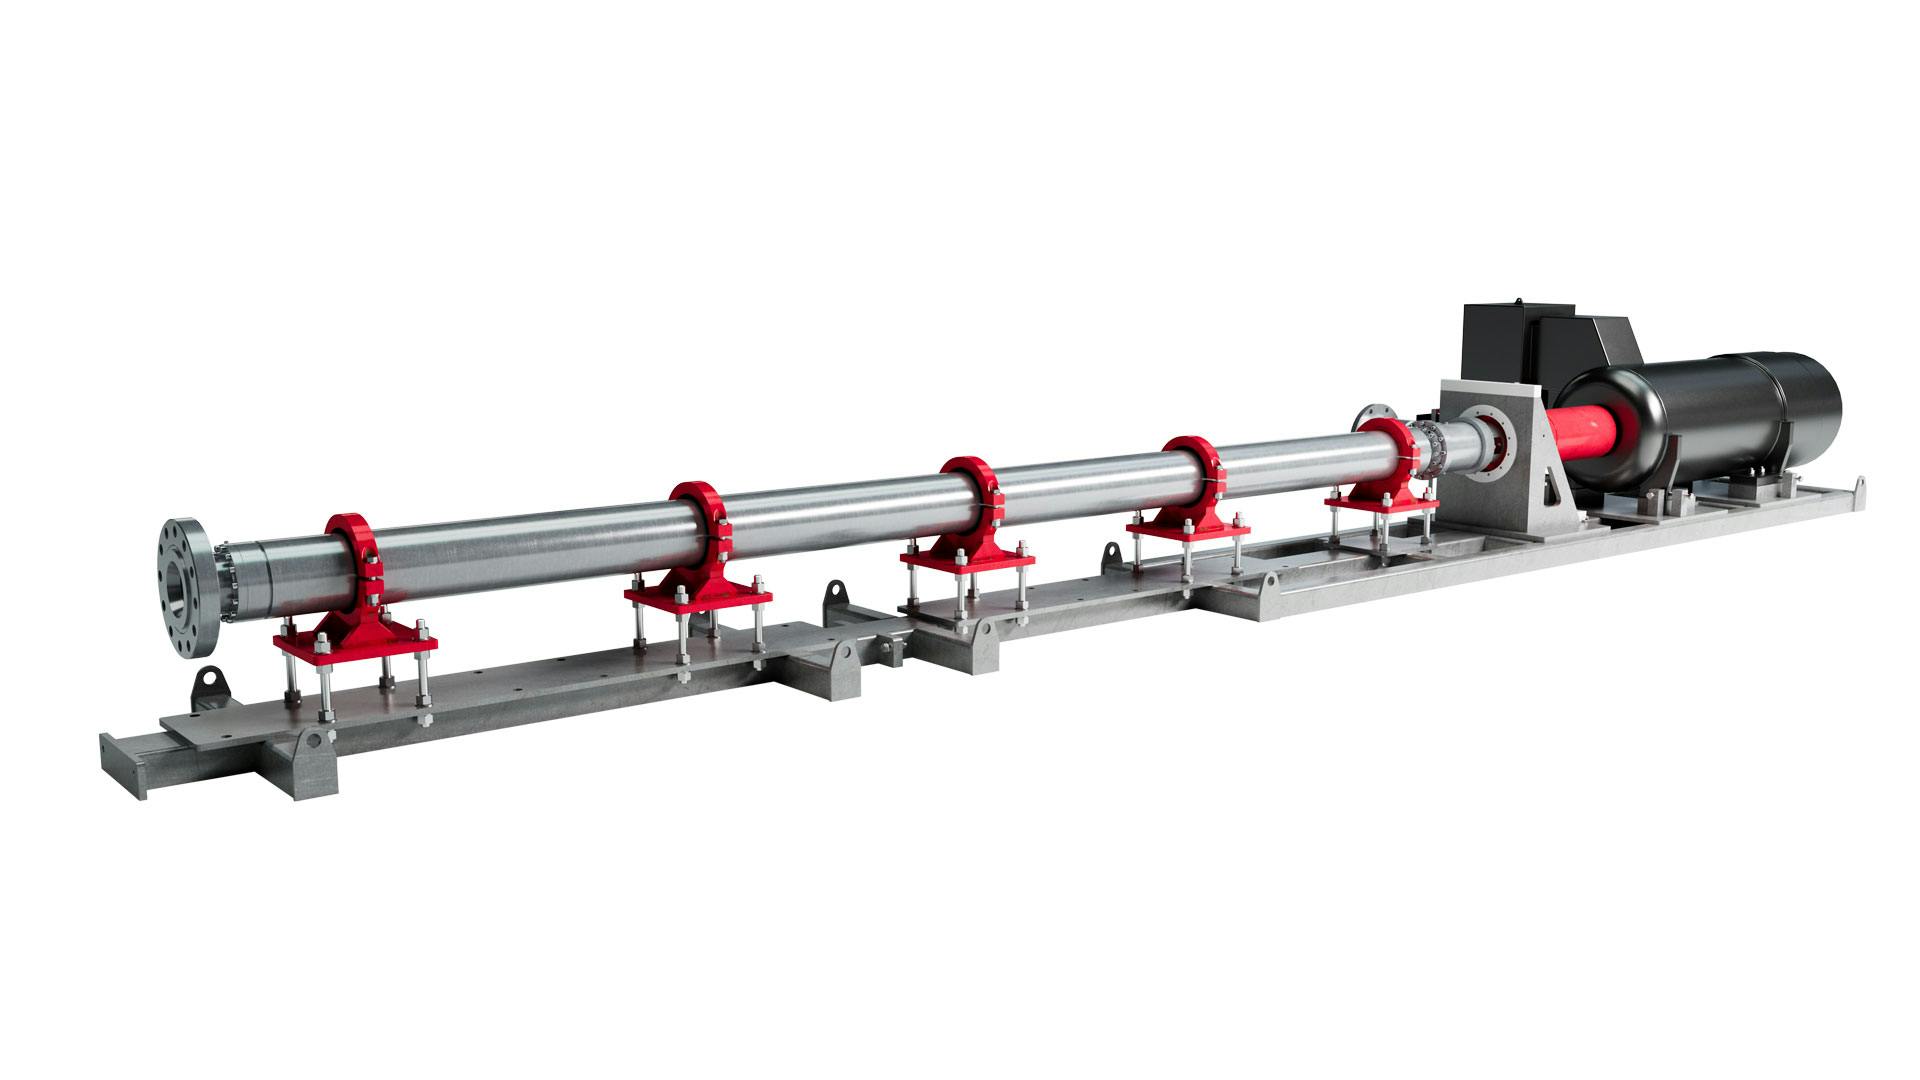 Front angle render of Mach 1 Horizontal Pumping System